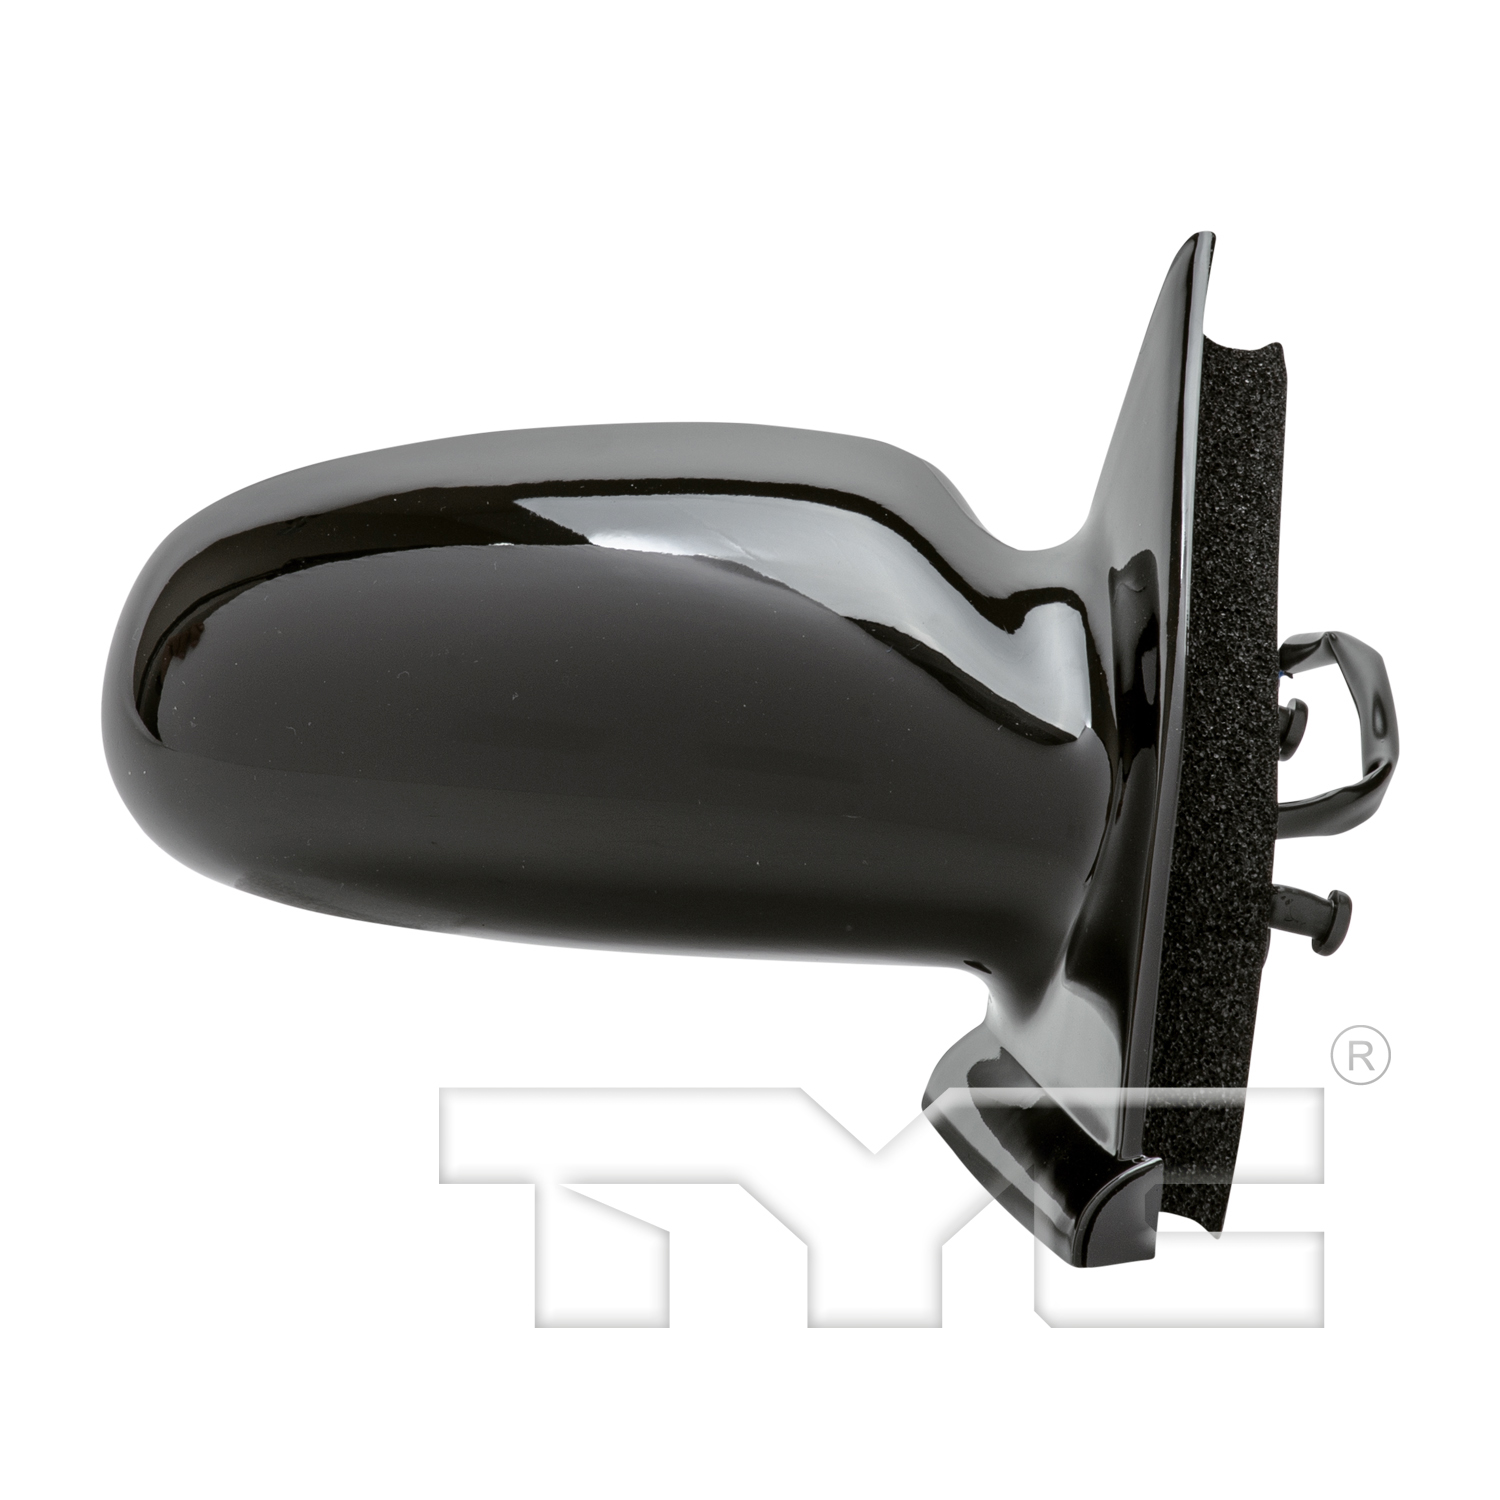 Aftermarket MIRRORS for SATURN - SL2, SL2,96-02,RT Mirror outside rear view